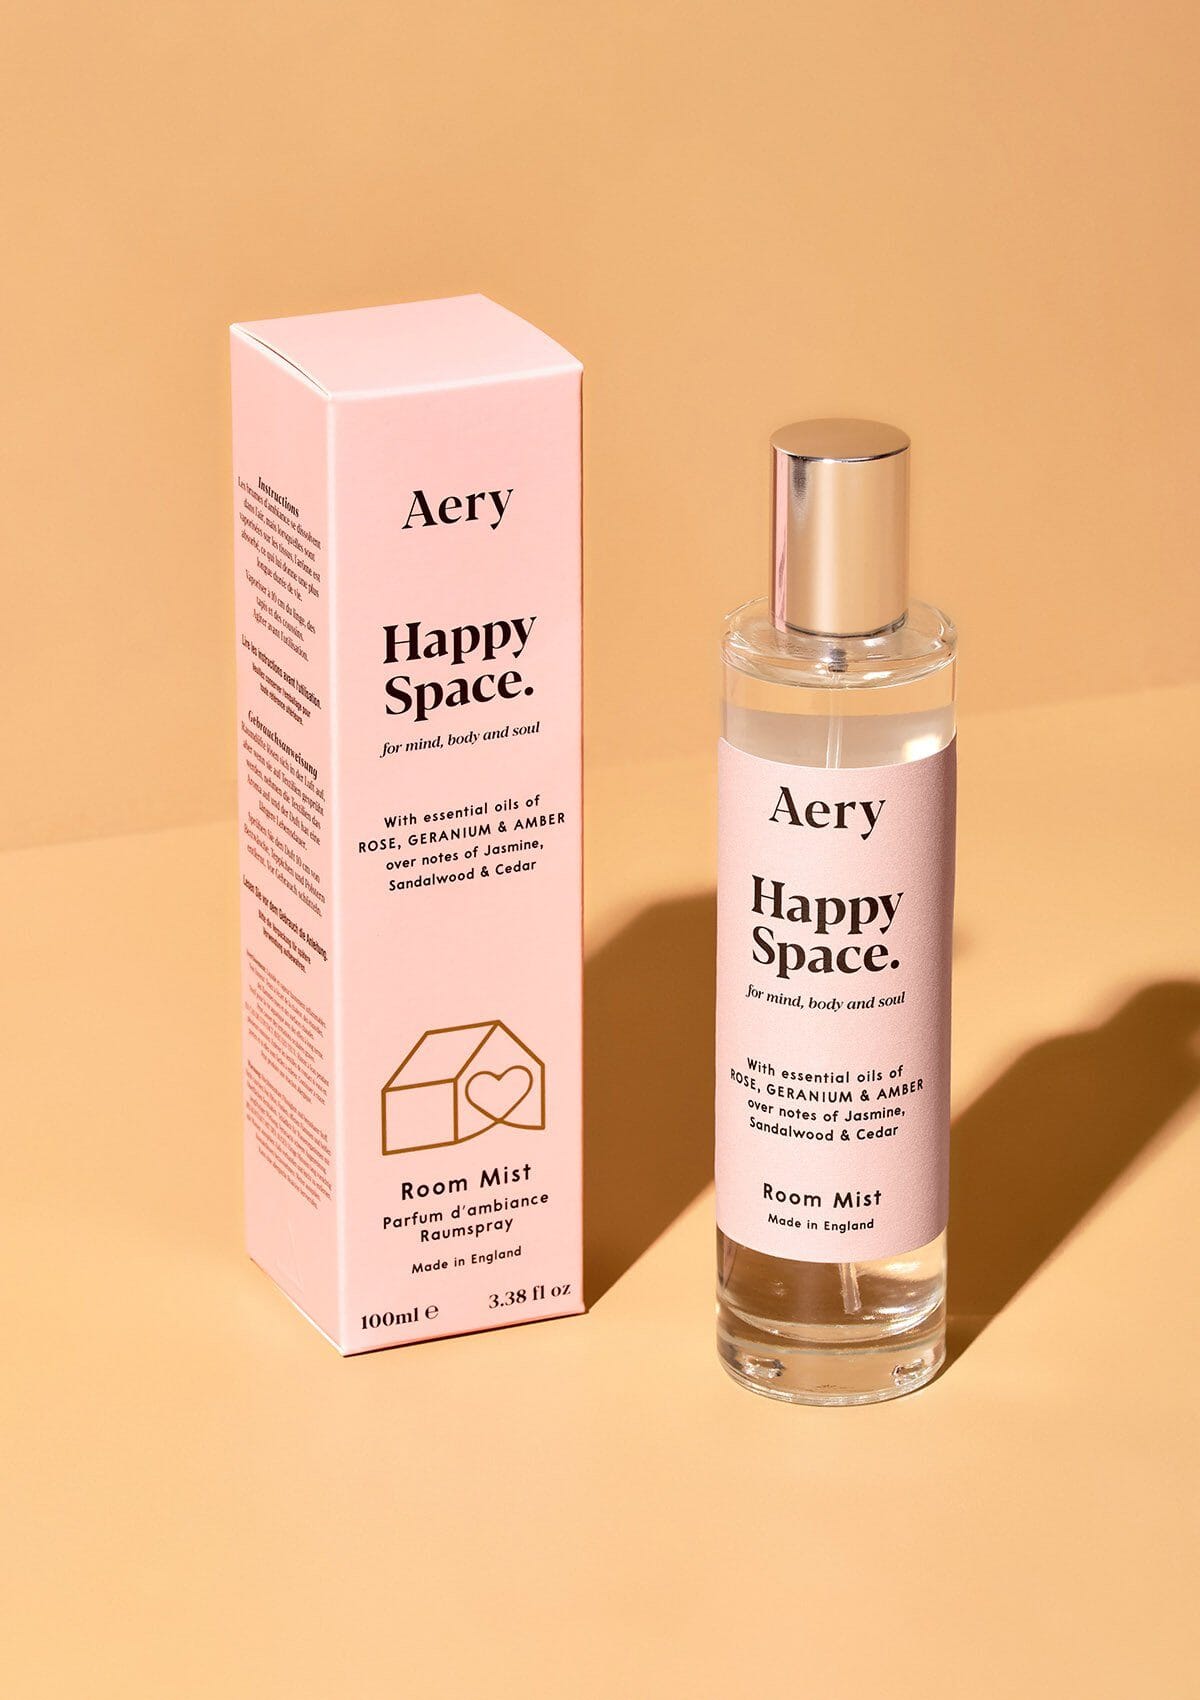 pink bottle of happy space room mist displayed next to product packaging